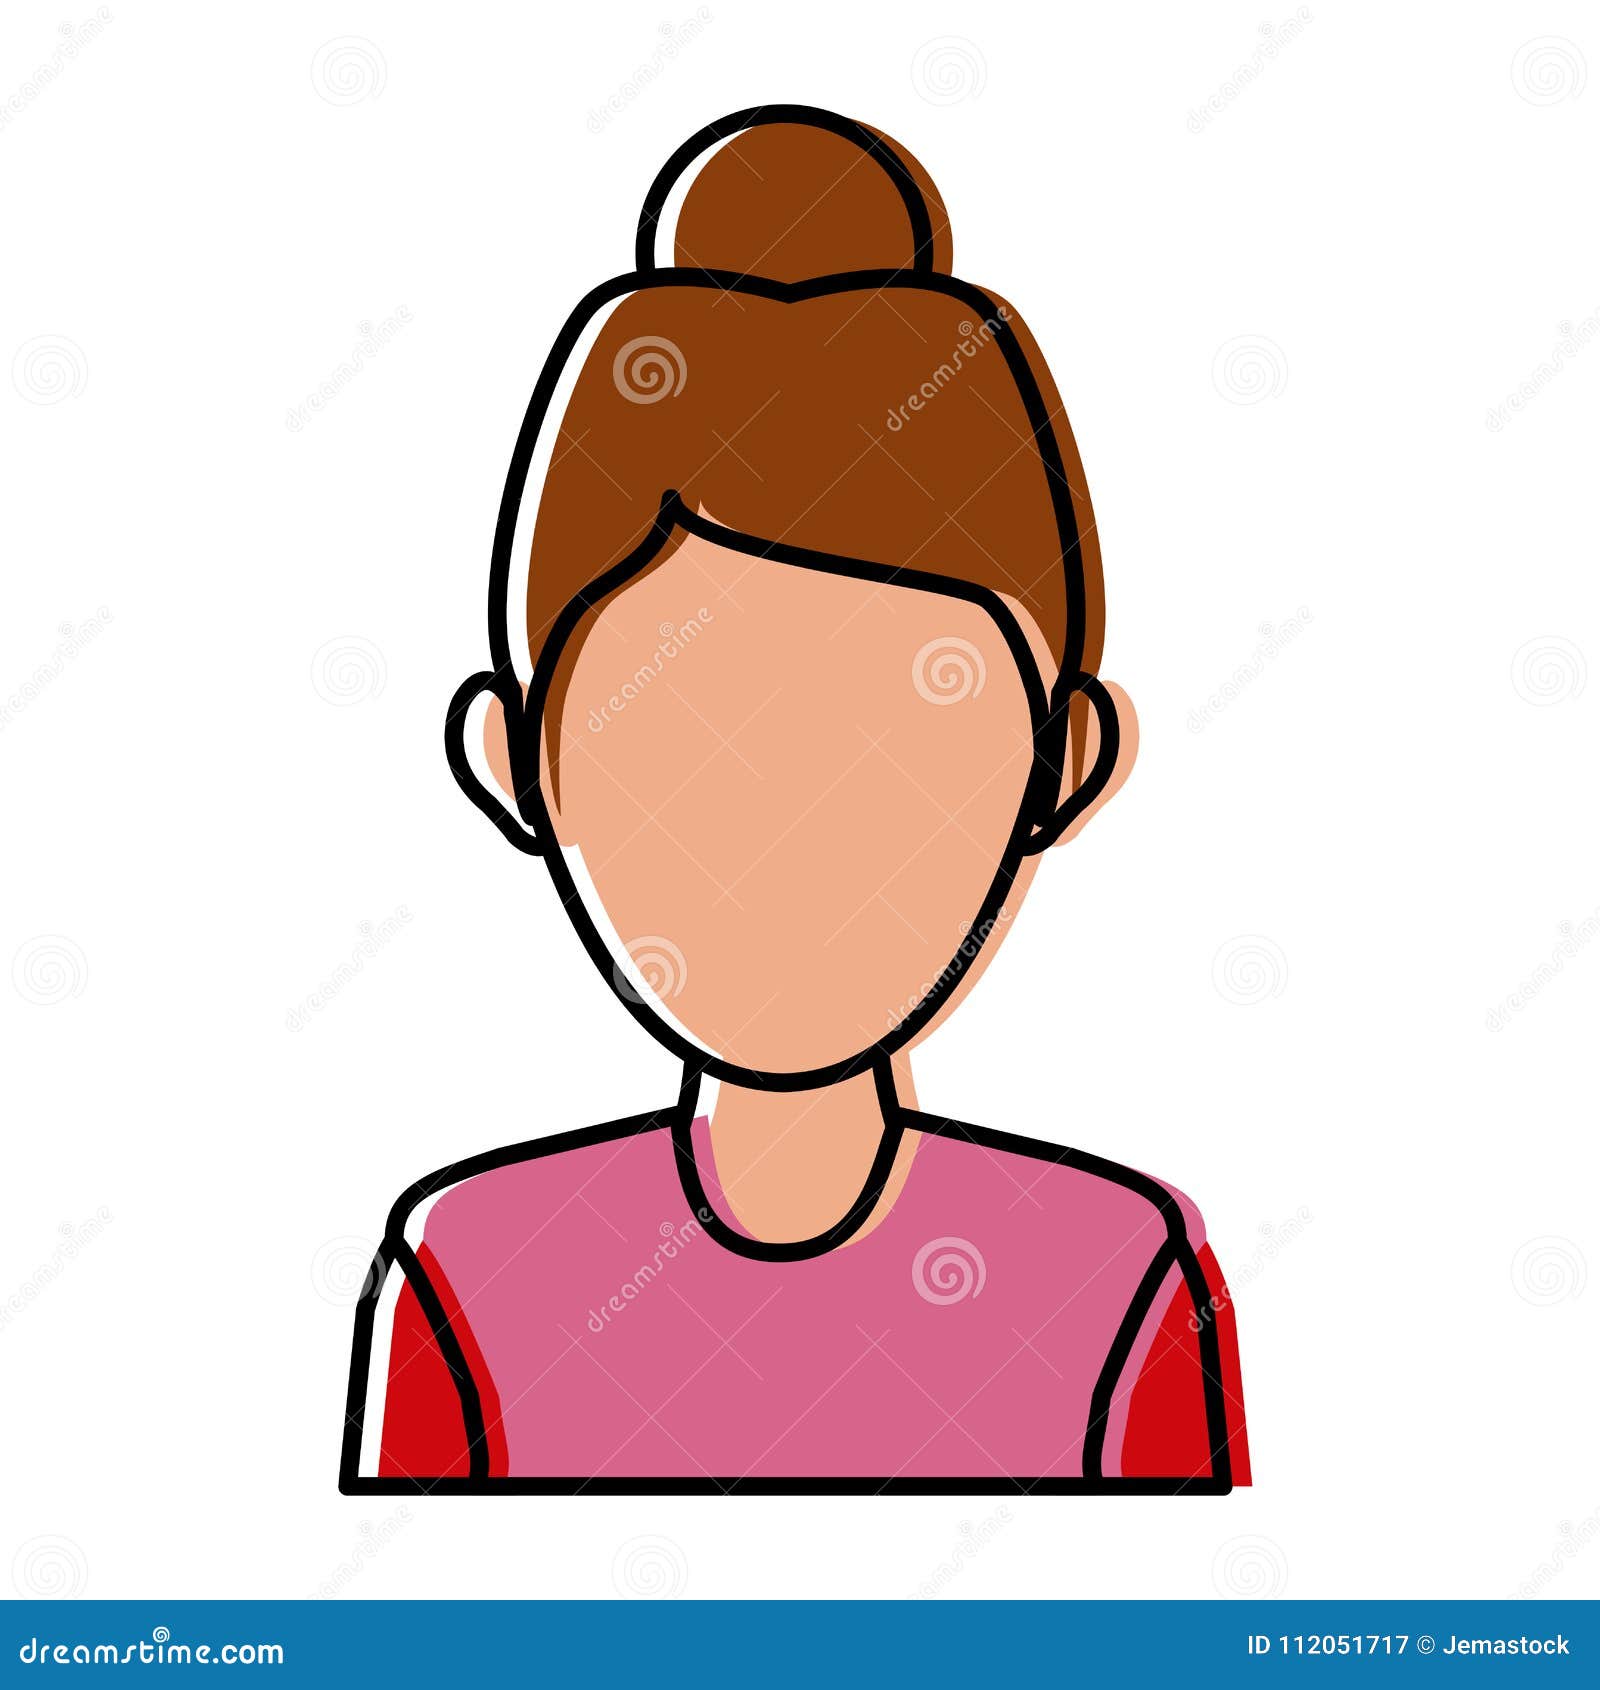 Employee Avatar by Graphic Mall on Dribbble